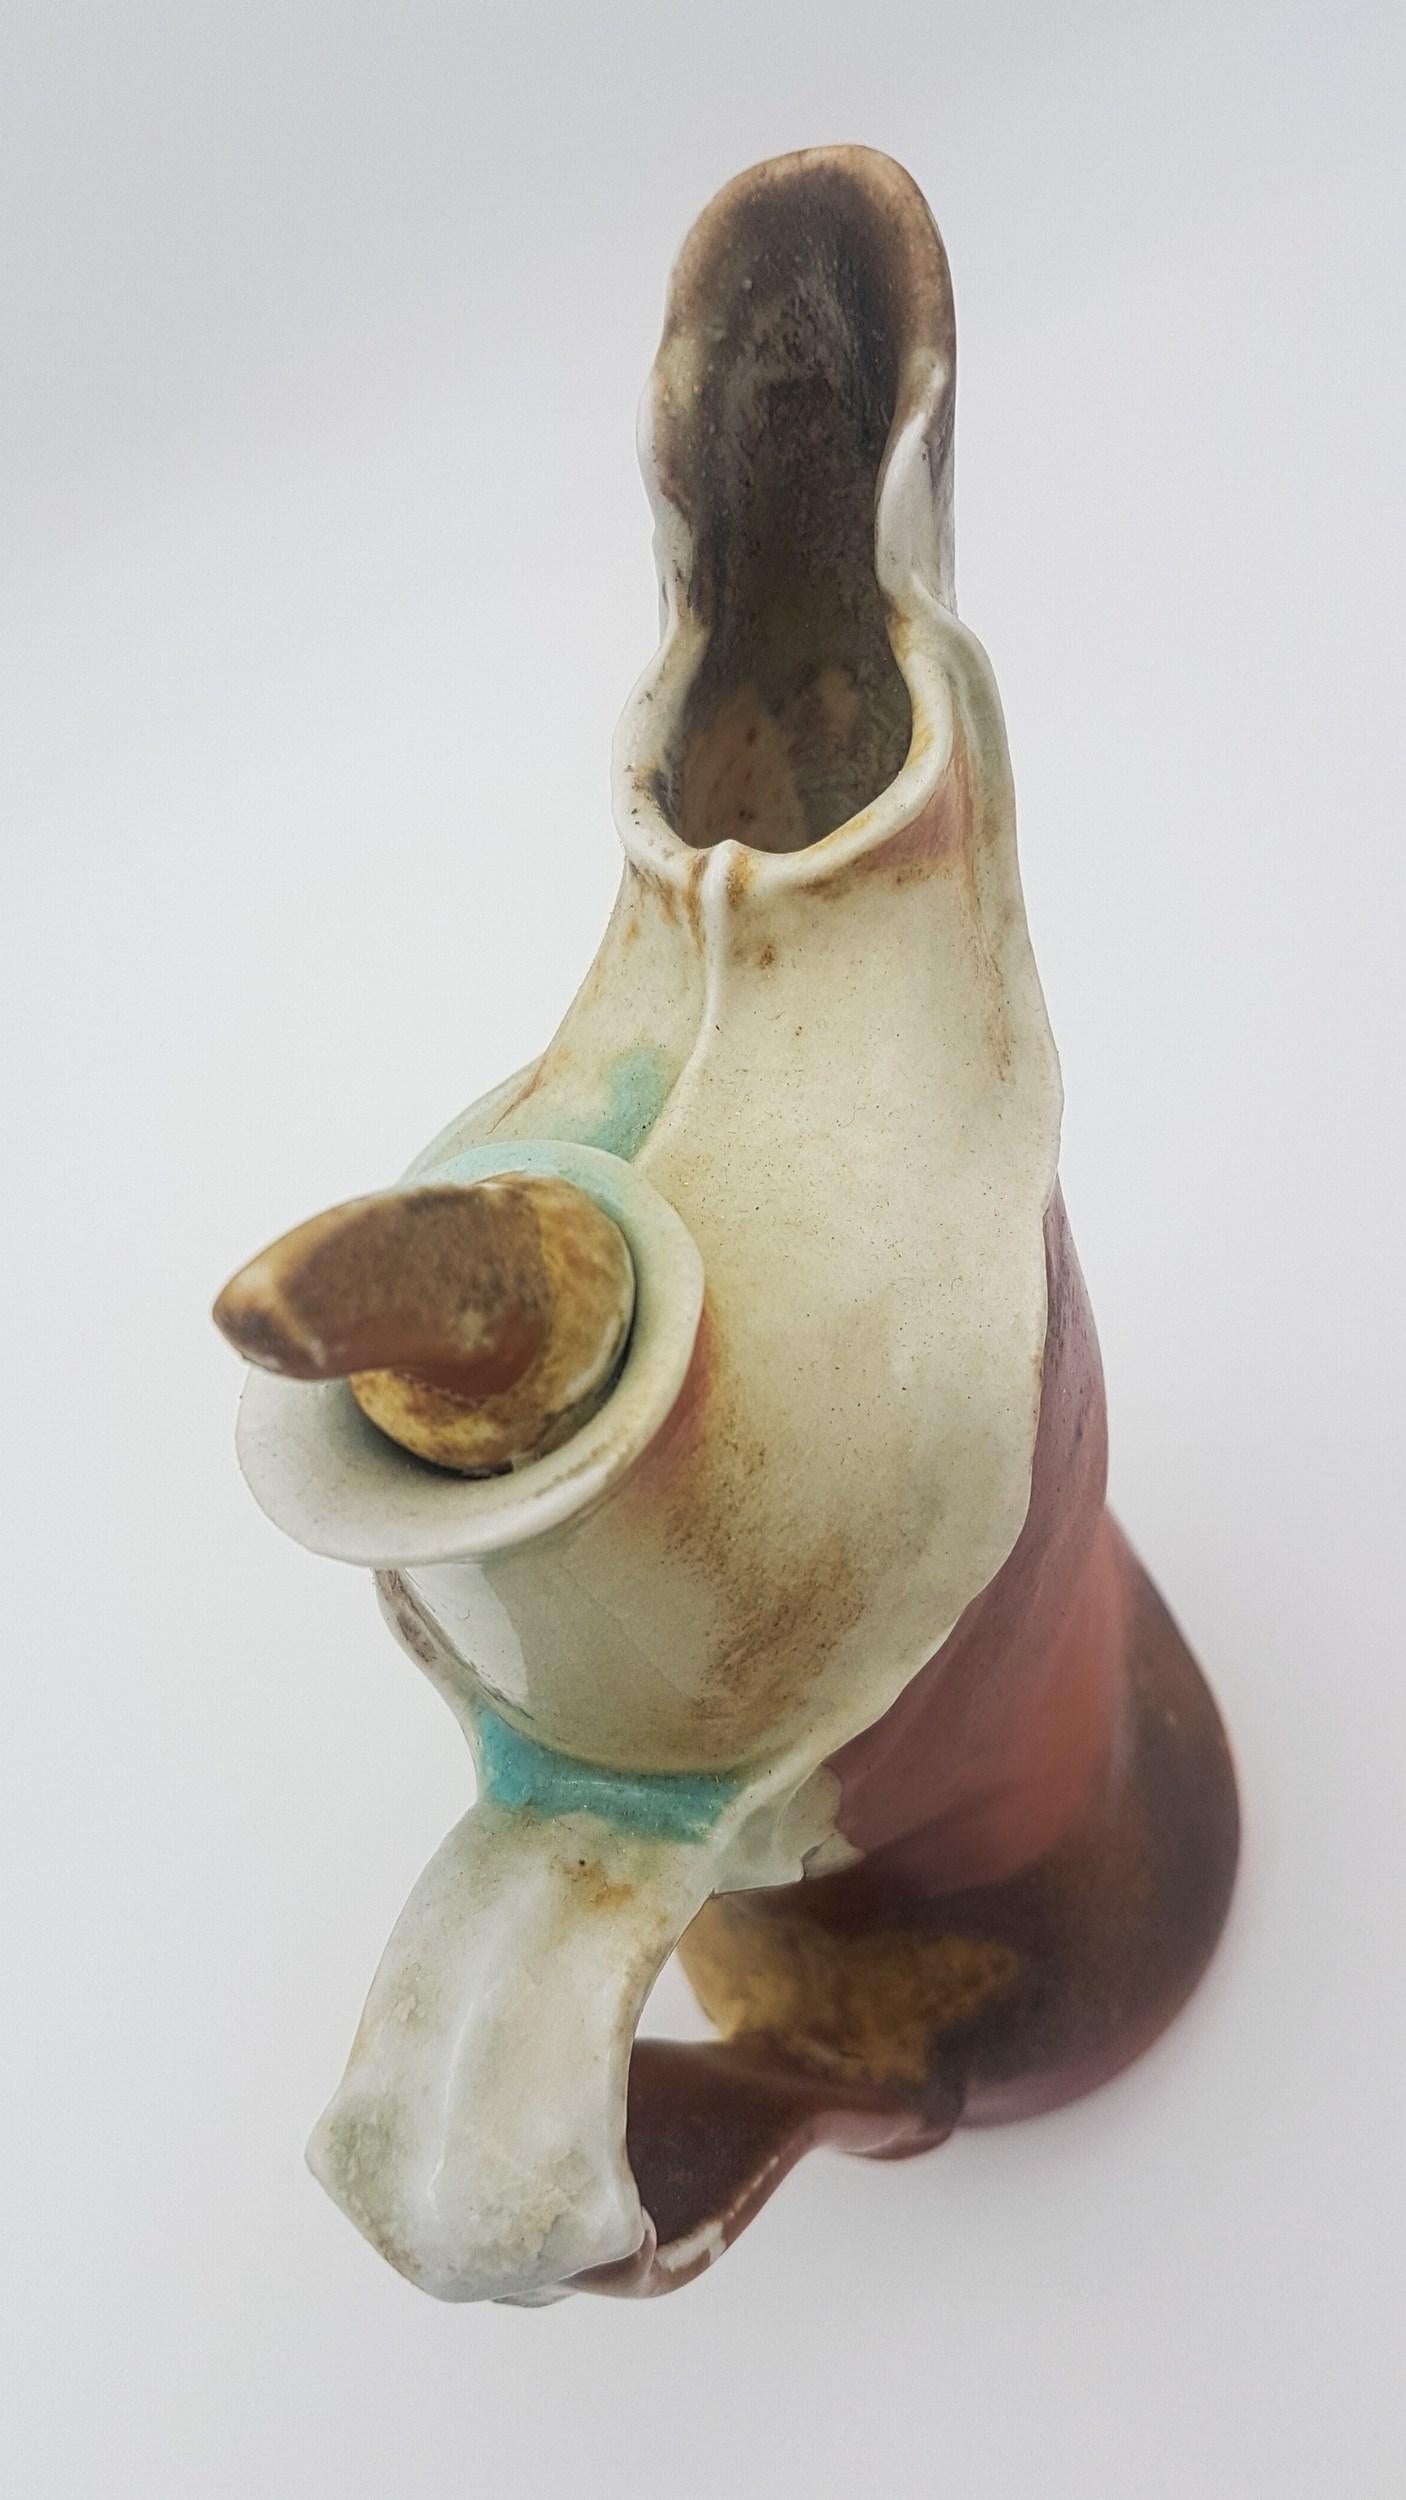 Wood Fired Pitcher (Anagama, Cave, Kiln, Dan Anderson, Rustic) - Modern Sculpture by Melanie Sherman